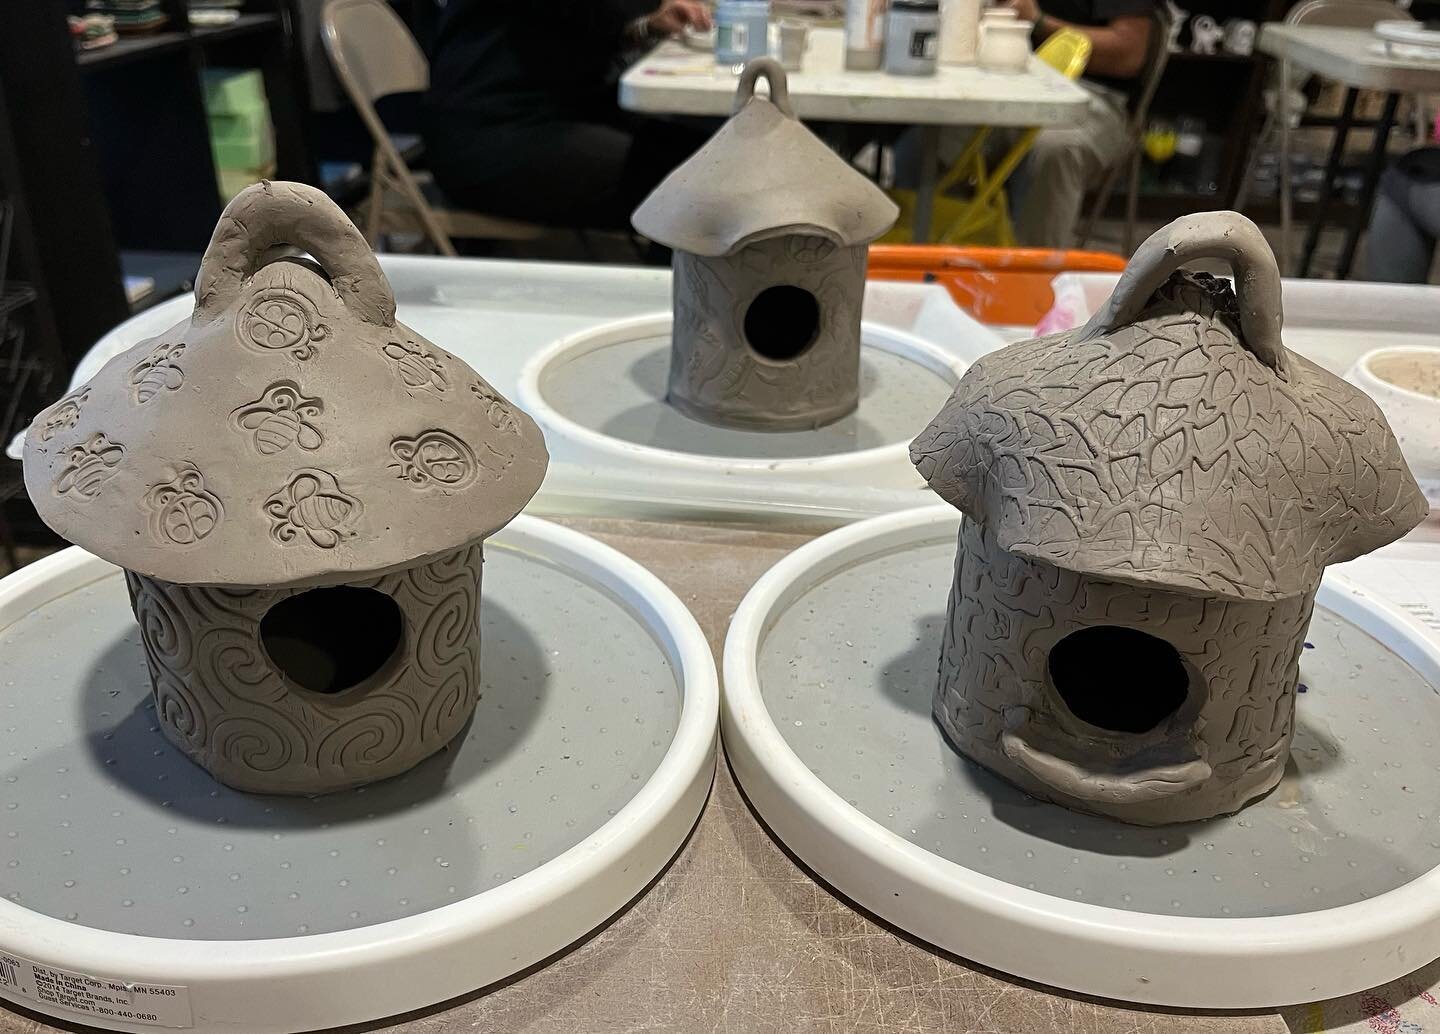 Getting samples made for some upcoming Build a Birdhouse workshops. Who wants to make one? #ceramicsworkshops #birdhouse #ceramicbirdhouse #artworkshop #manchestervt #becreative #southernvt